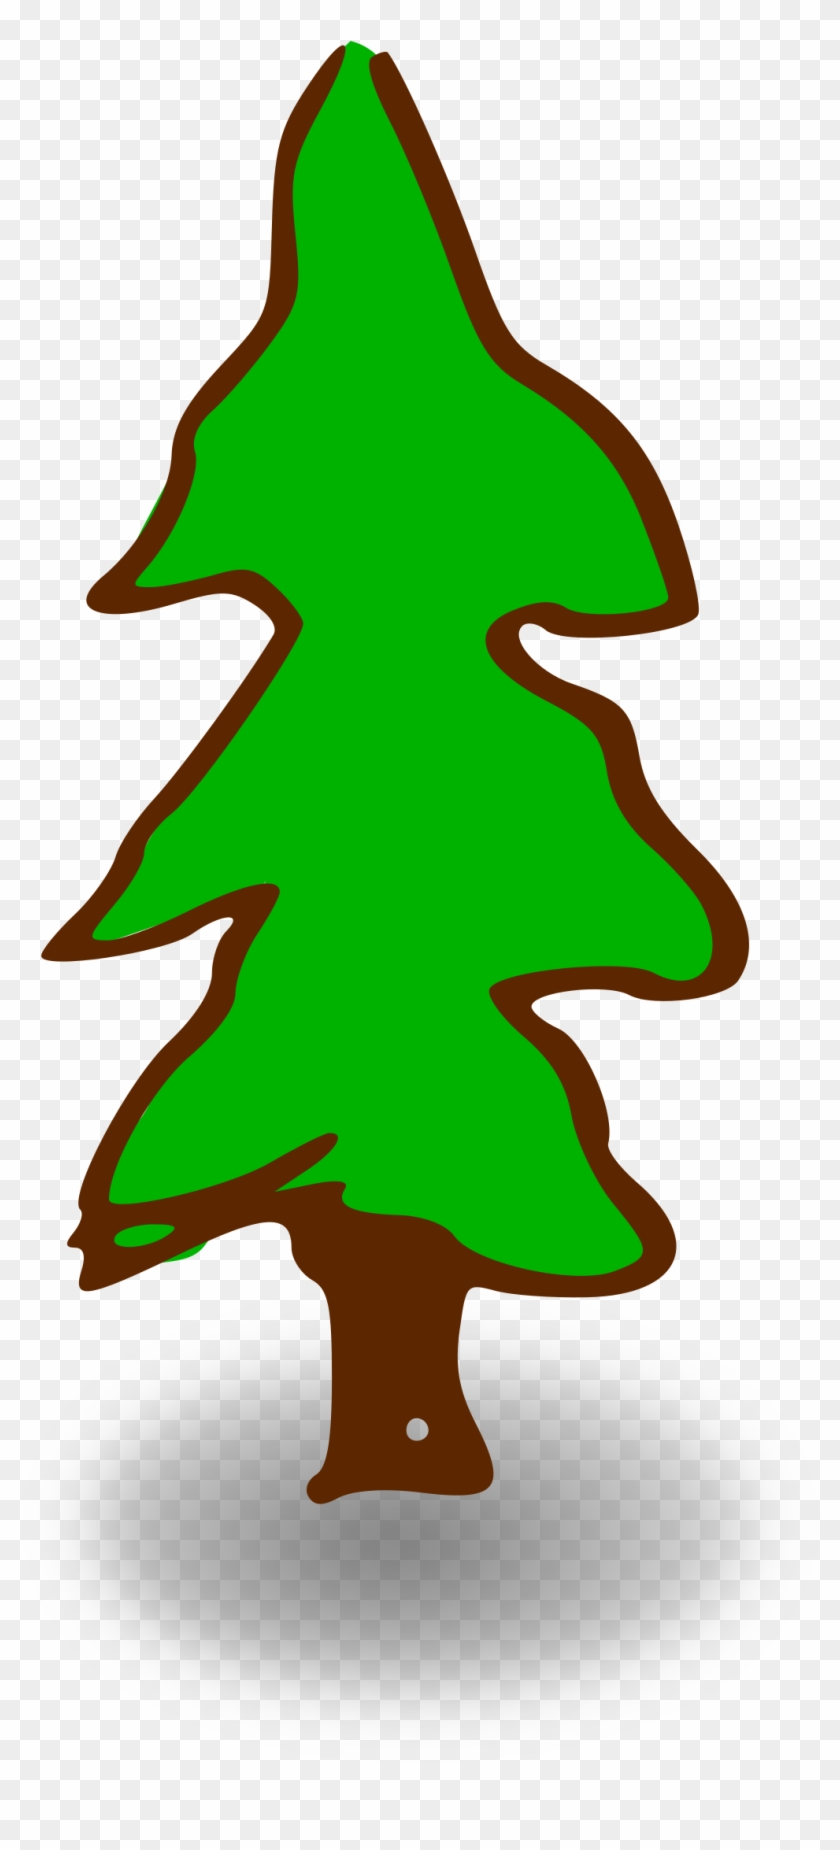 Evergreen - Cartoon Tree With Transparent Background #466355